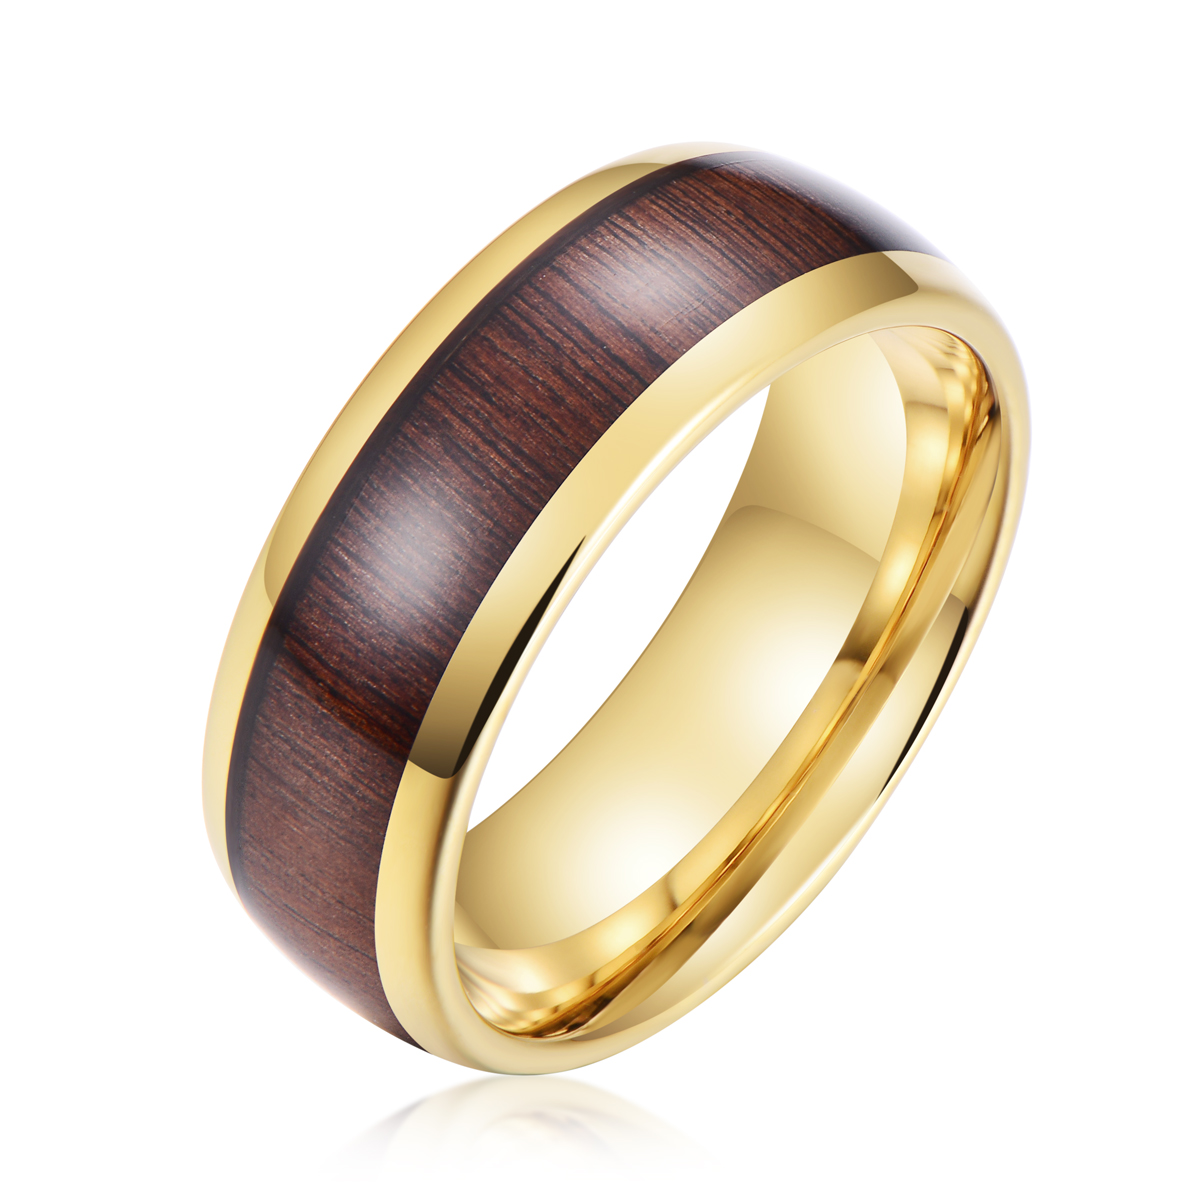 Best Selling Jewelry 8mm Tungsten Steel Ring Black Tungsten Ring With Wood Inlay For Man Featured Image